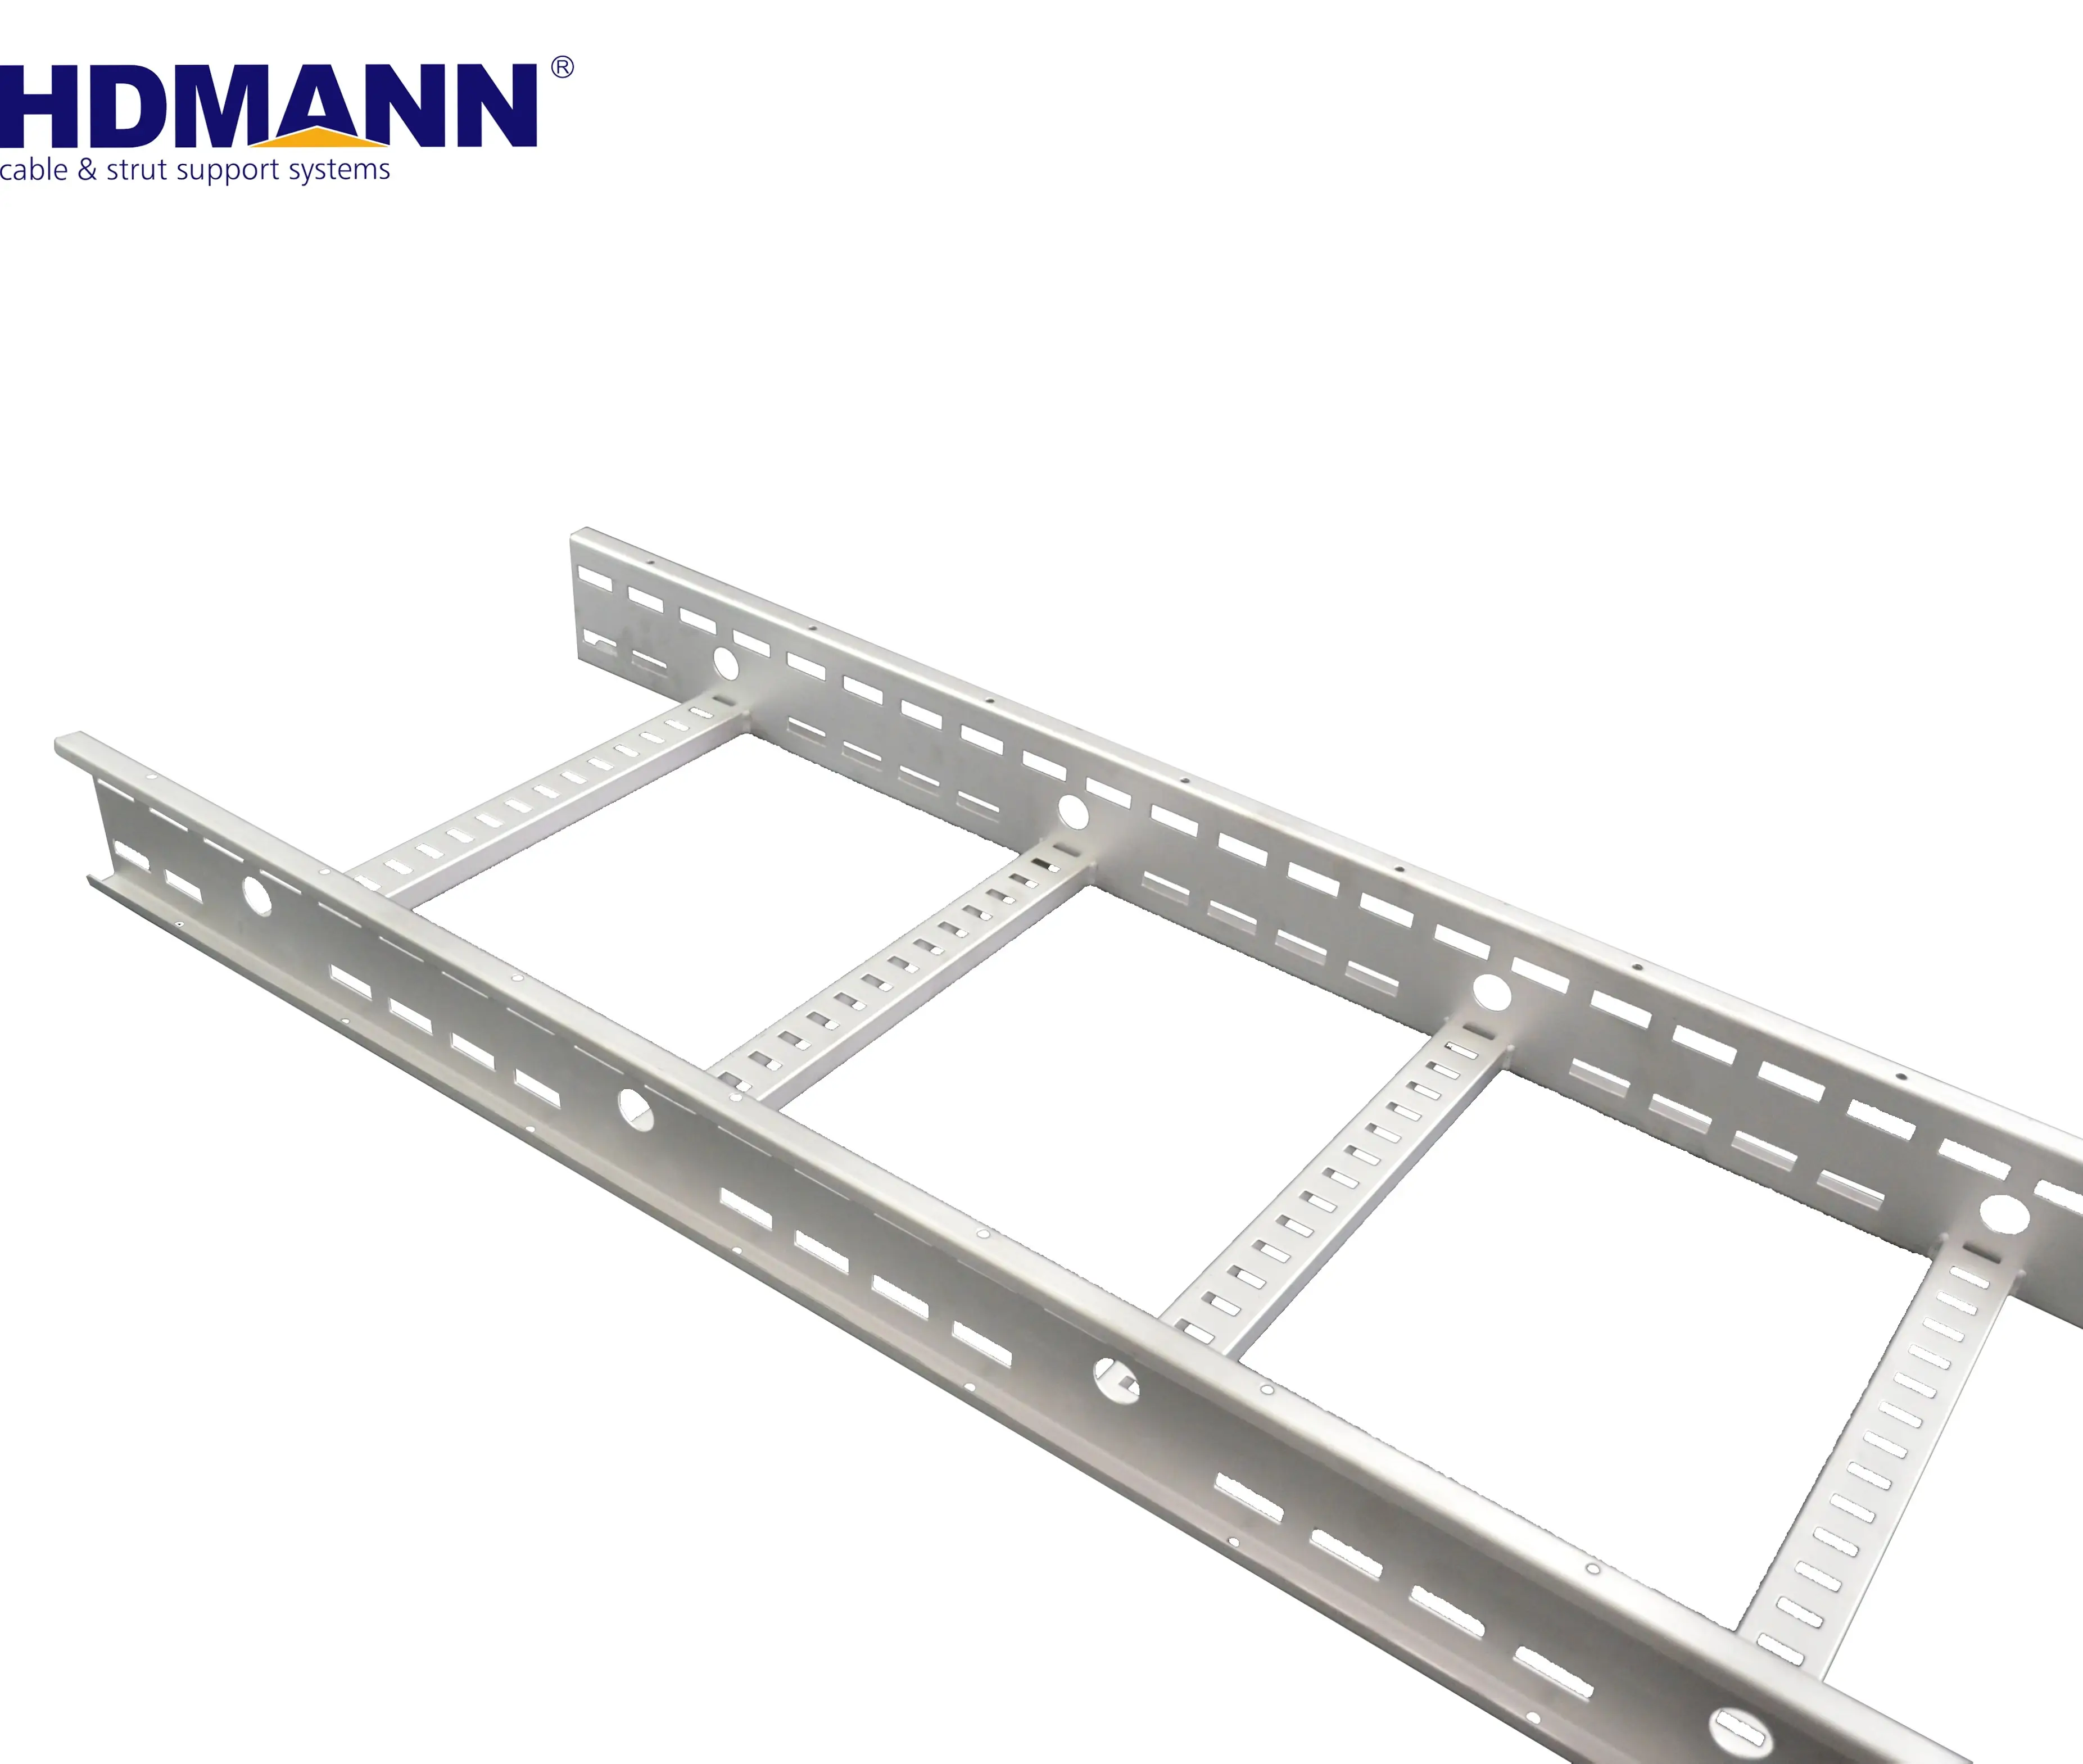 HDMANN FRP Glass Reinforced Plastic cable ladder